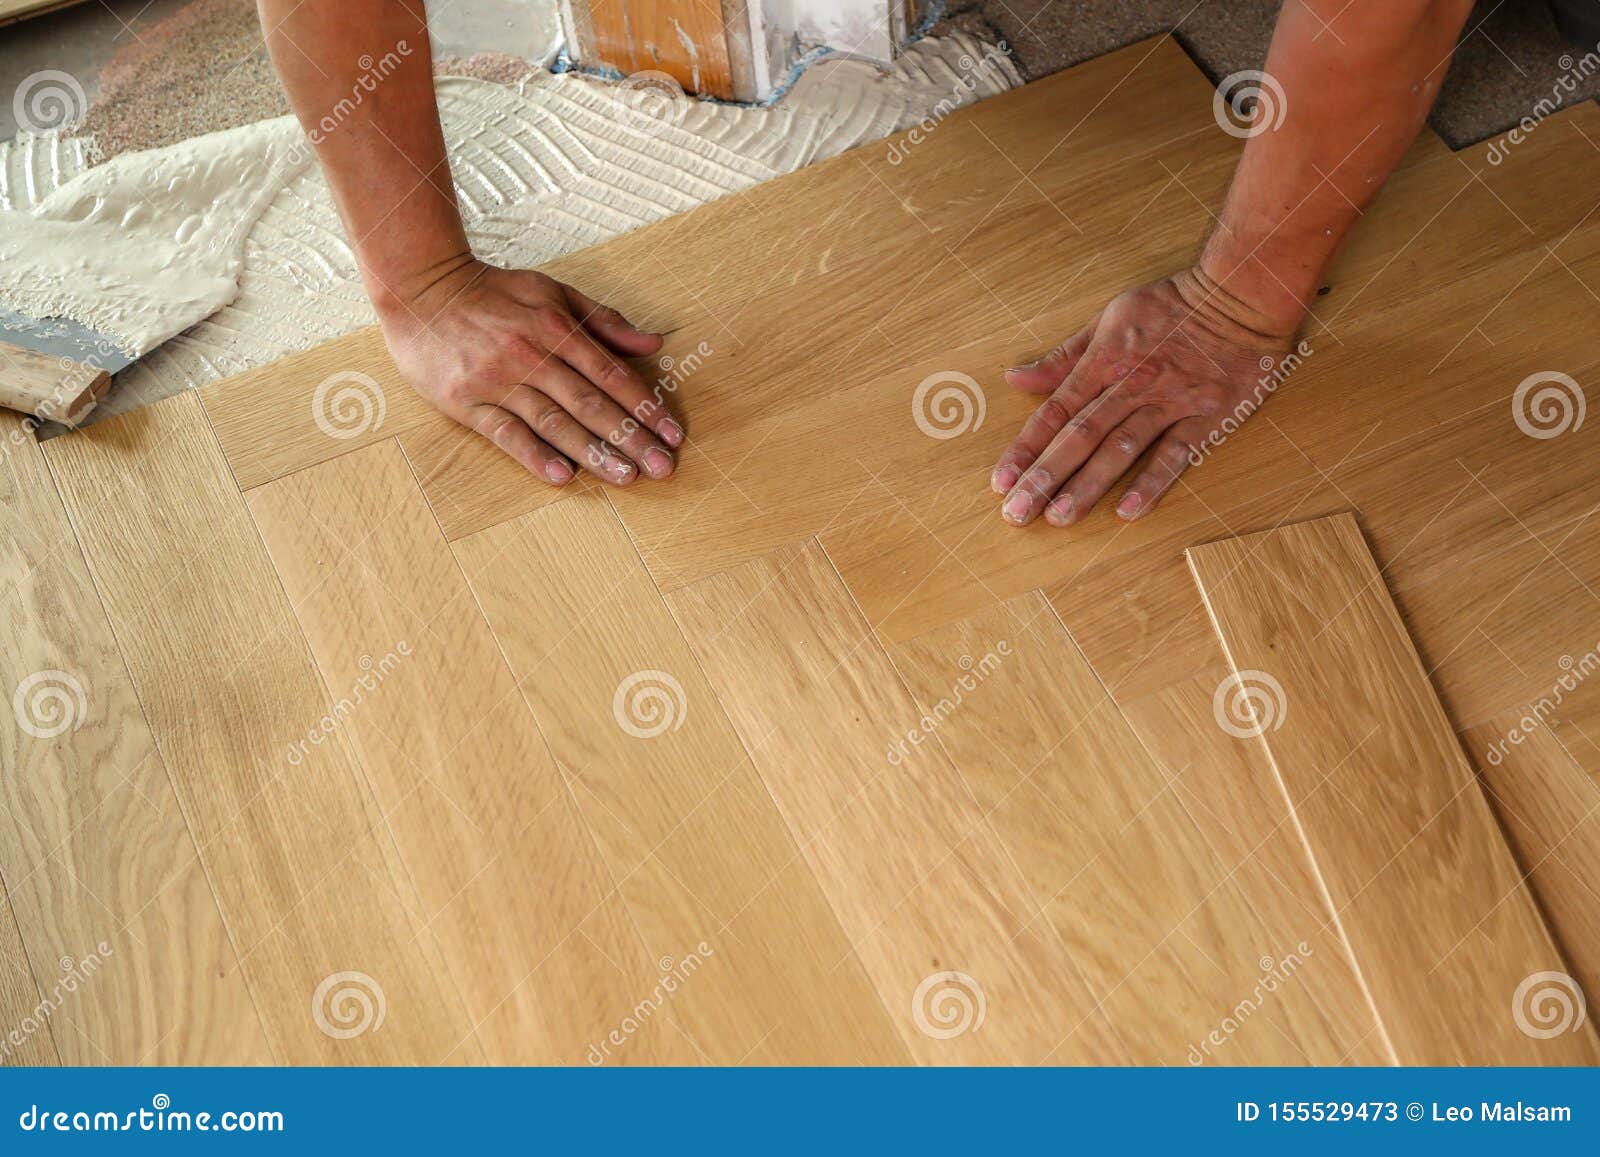 Worker Laying Parquet Flooring Stock Image Image Of Decor Male